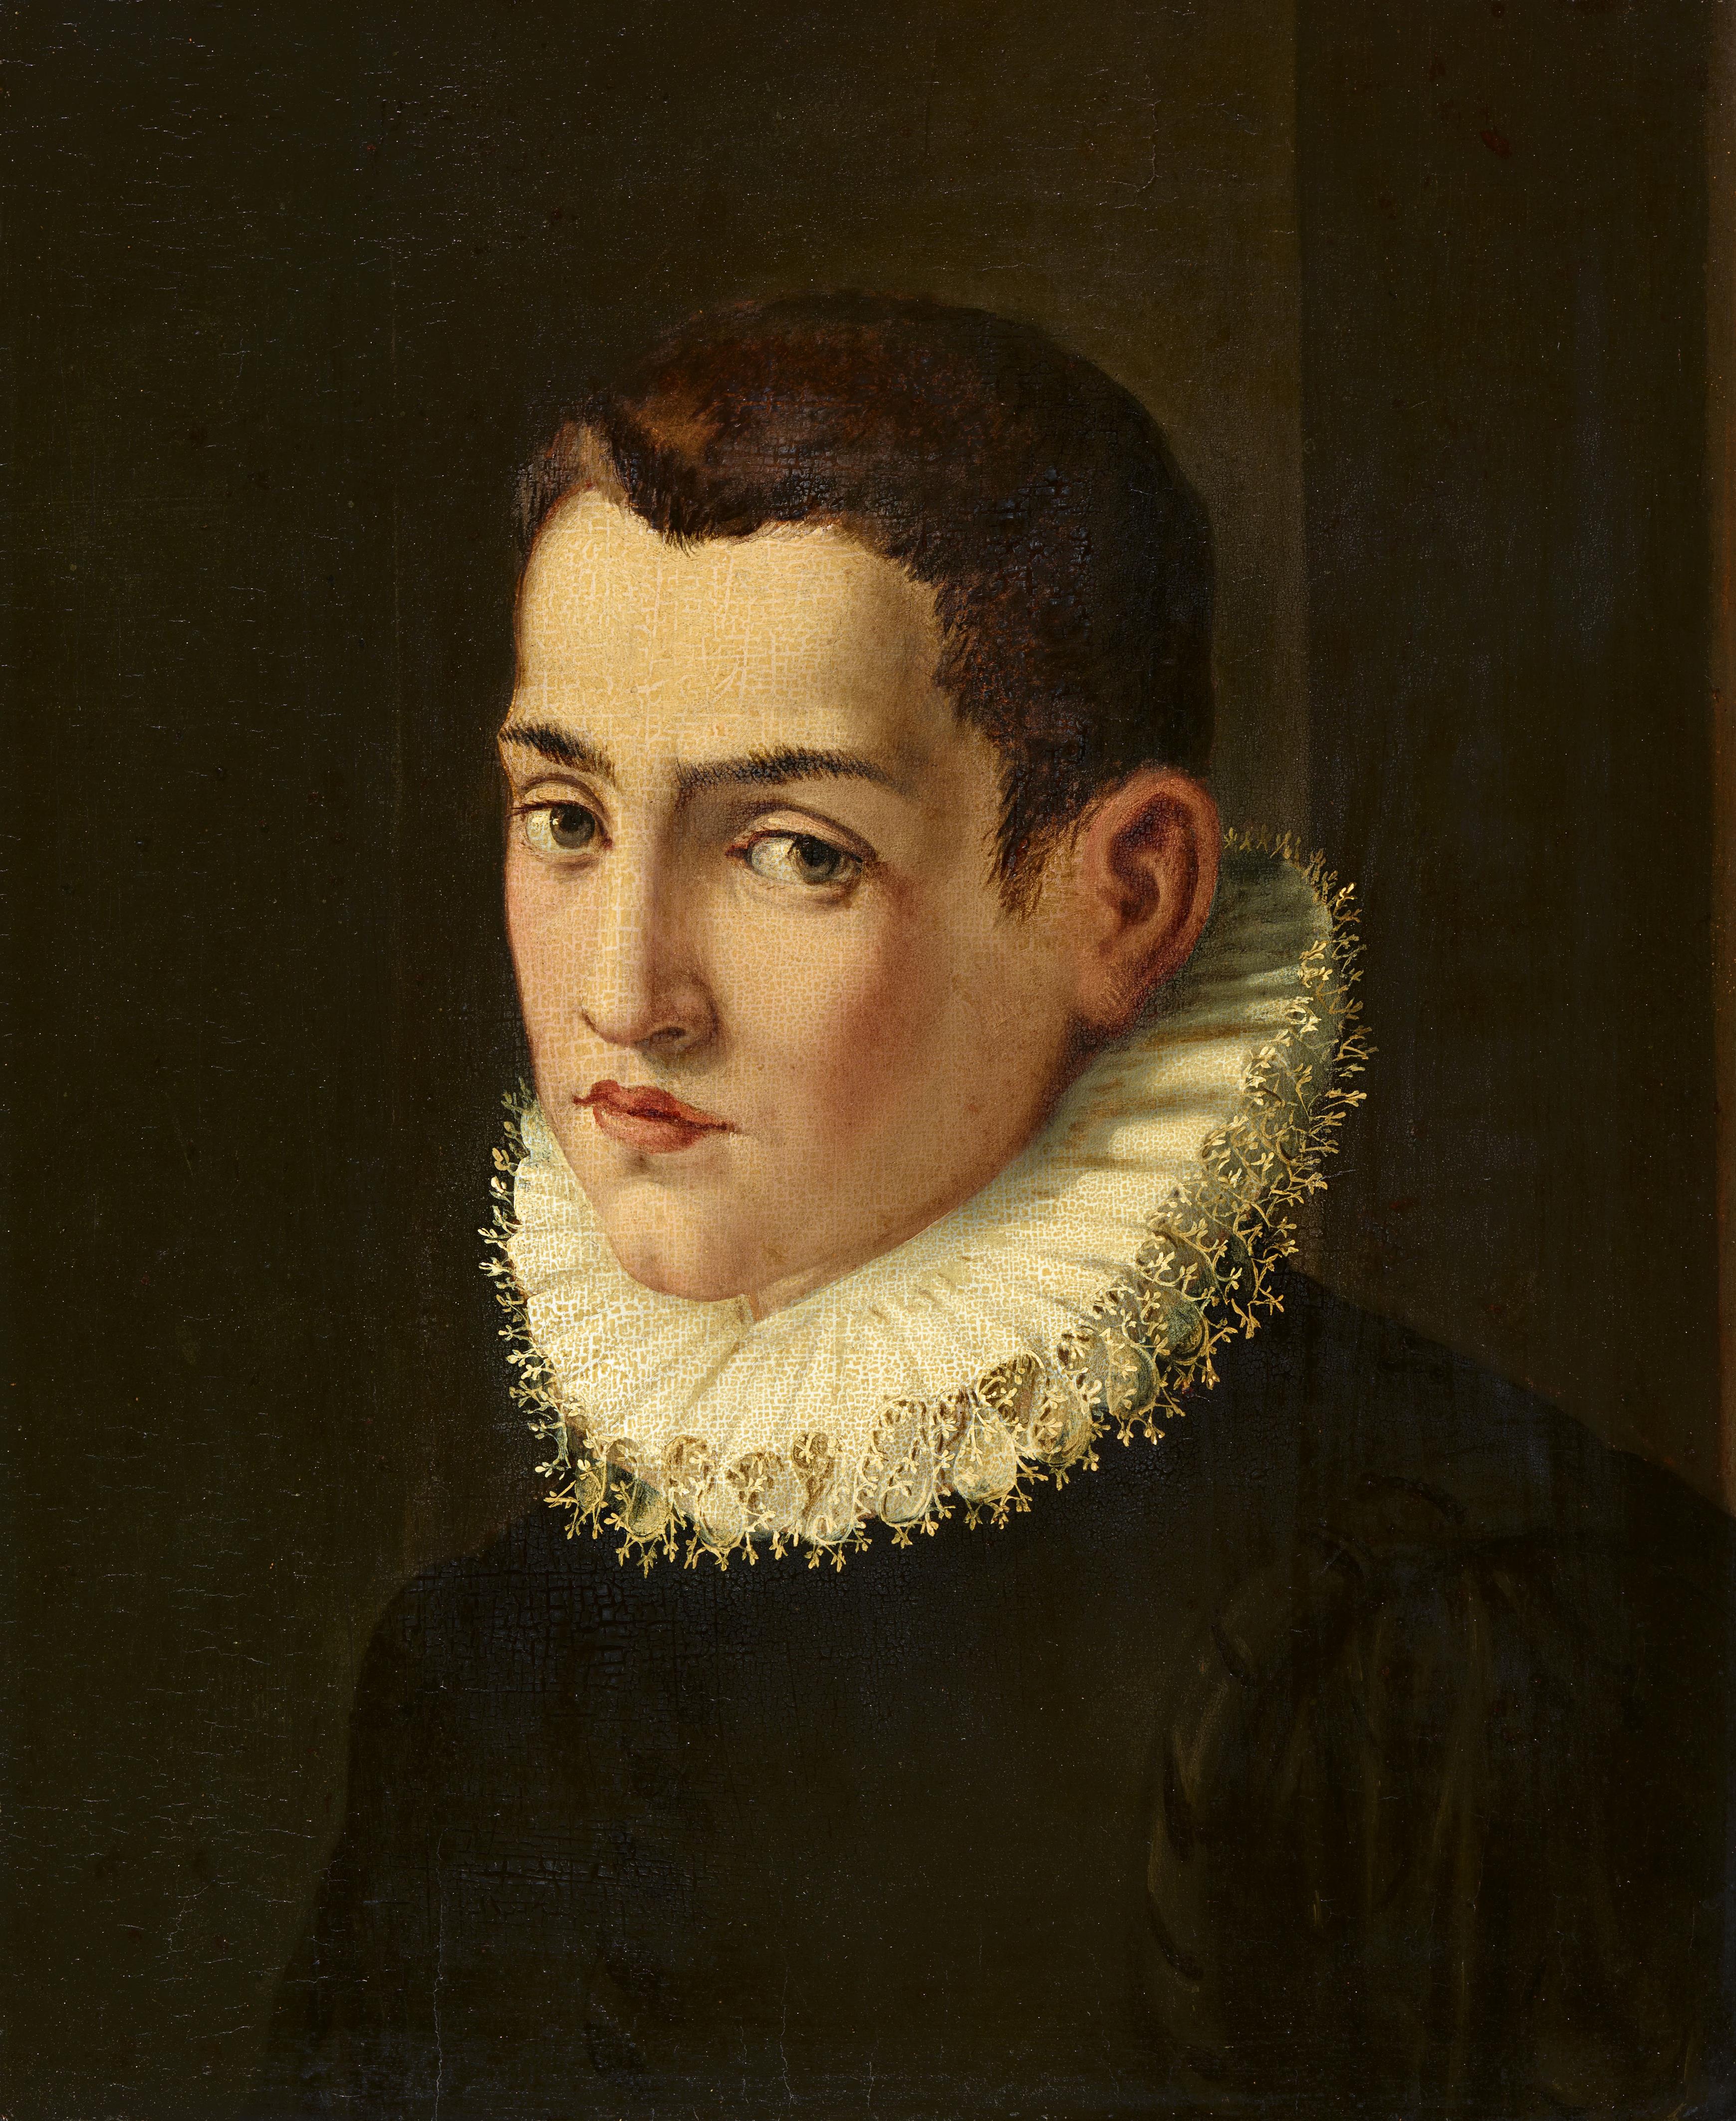 Agnolo Bronzino, attributed to - Portrait of a Young Man - image-1